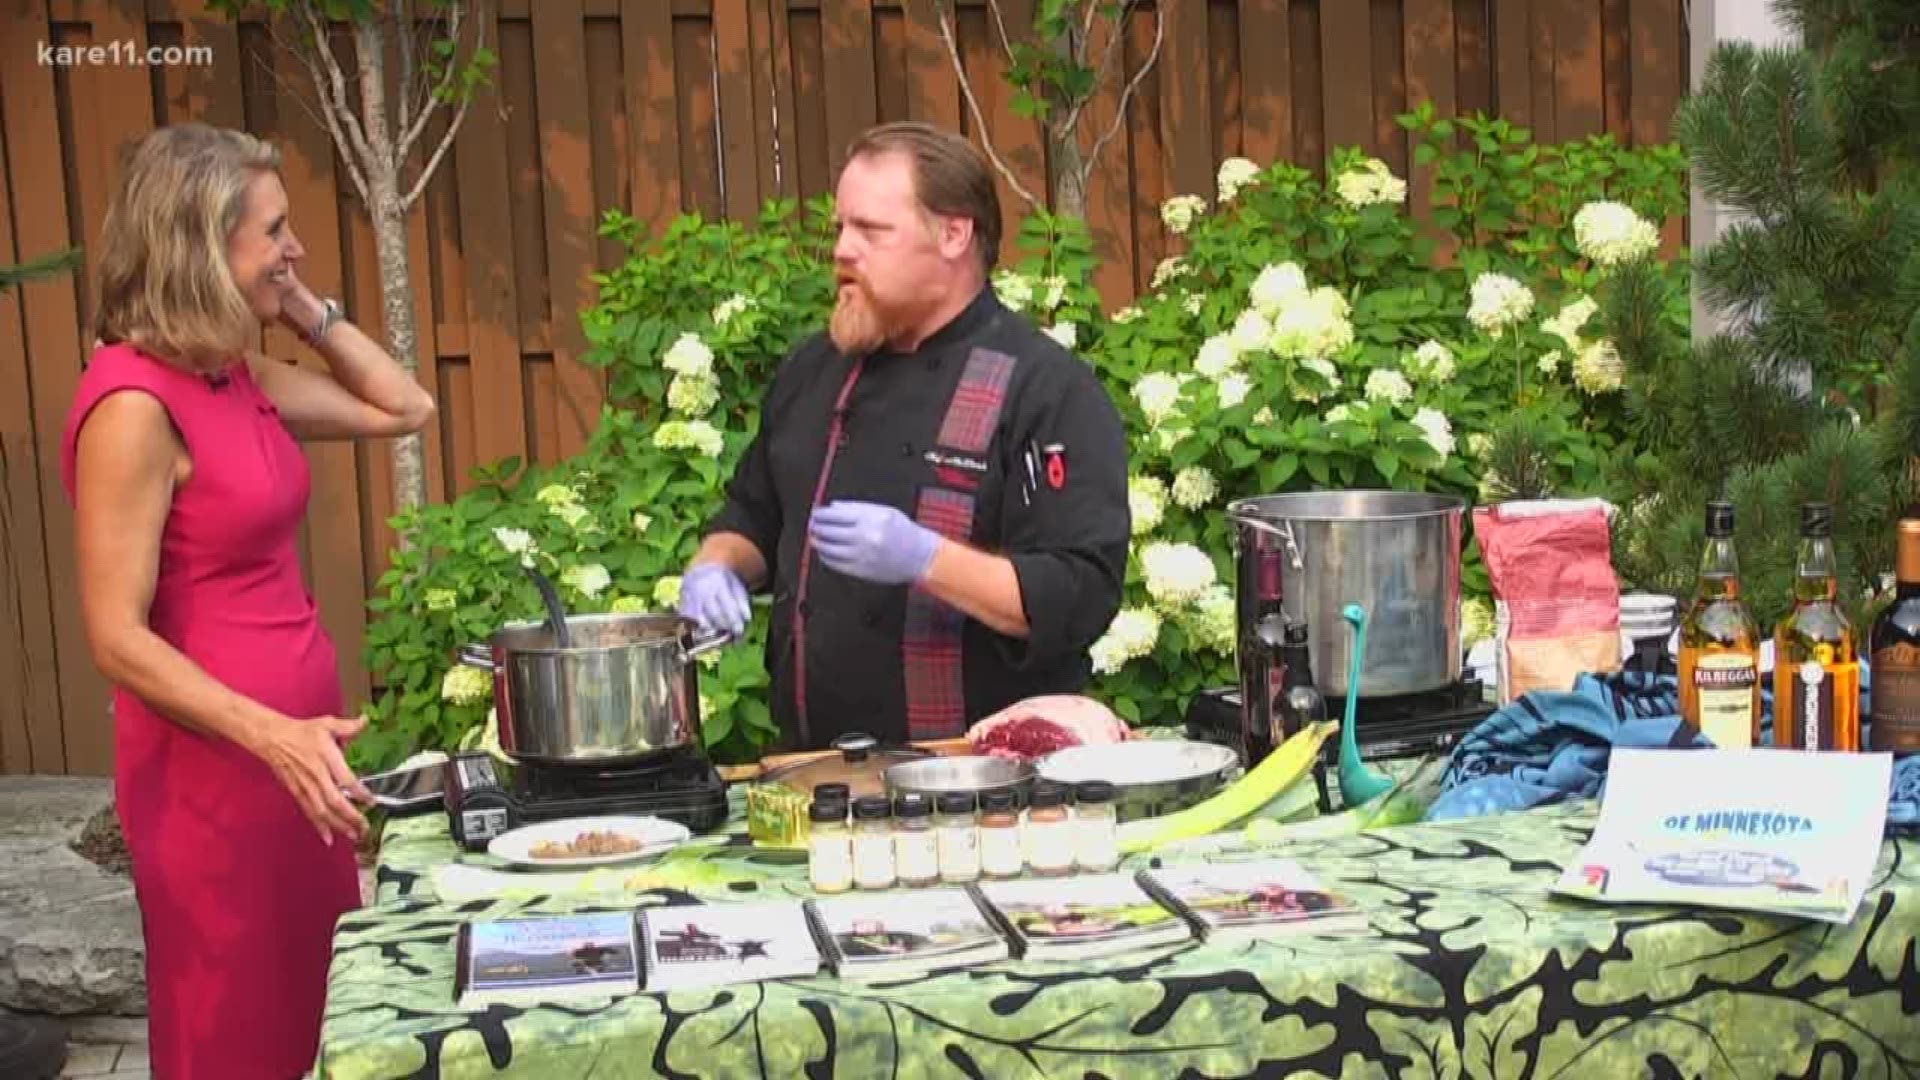 Chef Eric McBride from The Celtic Caterer joined Belinda in the yard this morning to cook an Irish themed dishe in honor of the Irish festival happening this weekend in St. Paul.